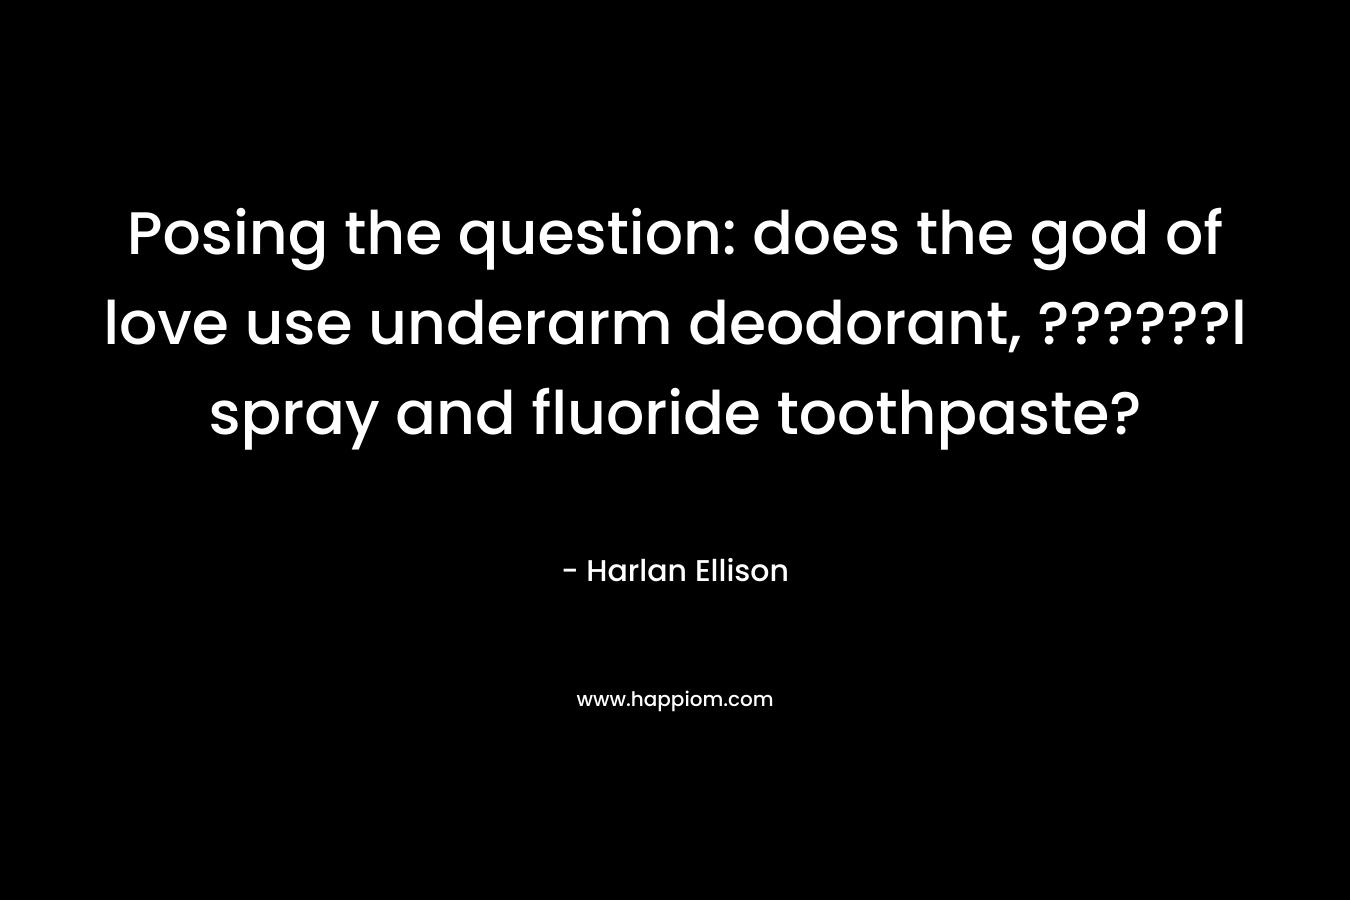 Posing the question: does the god of love use underarm deodorant, ??????l spray and fluoride toothpaste? – Harlan Ellison